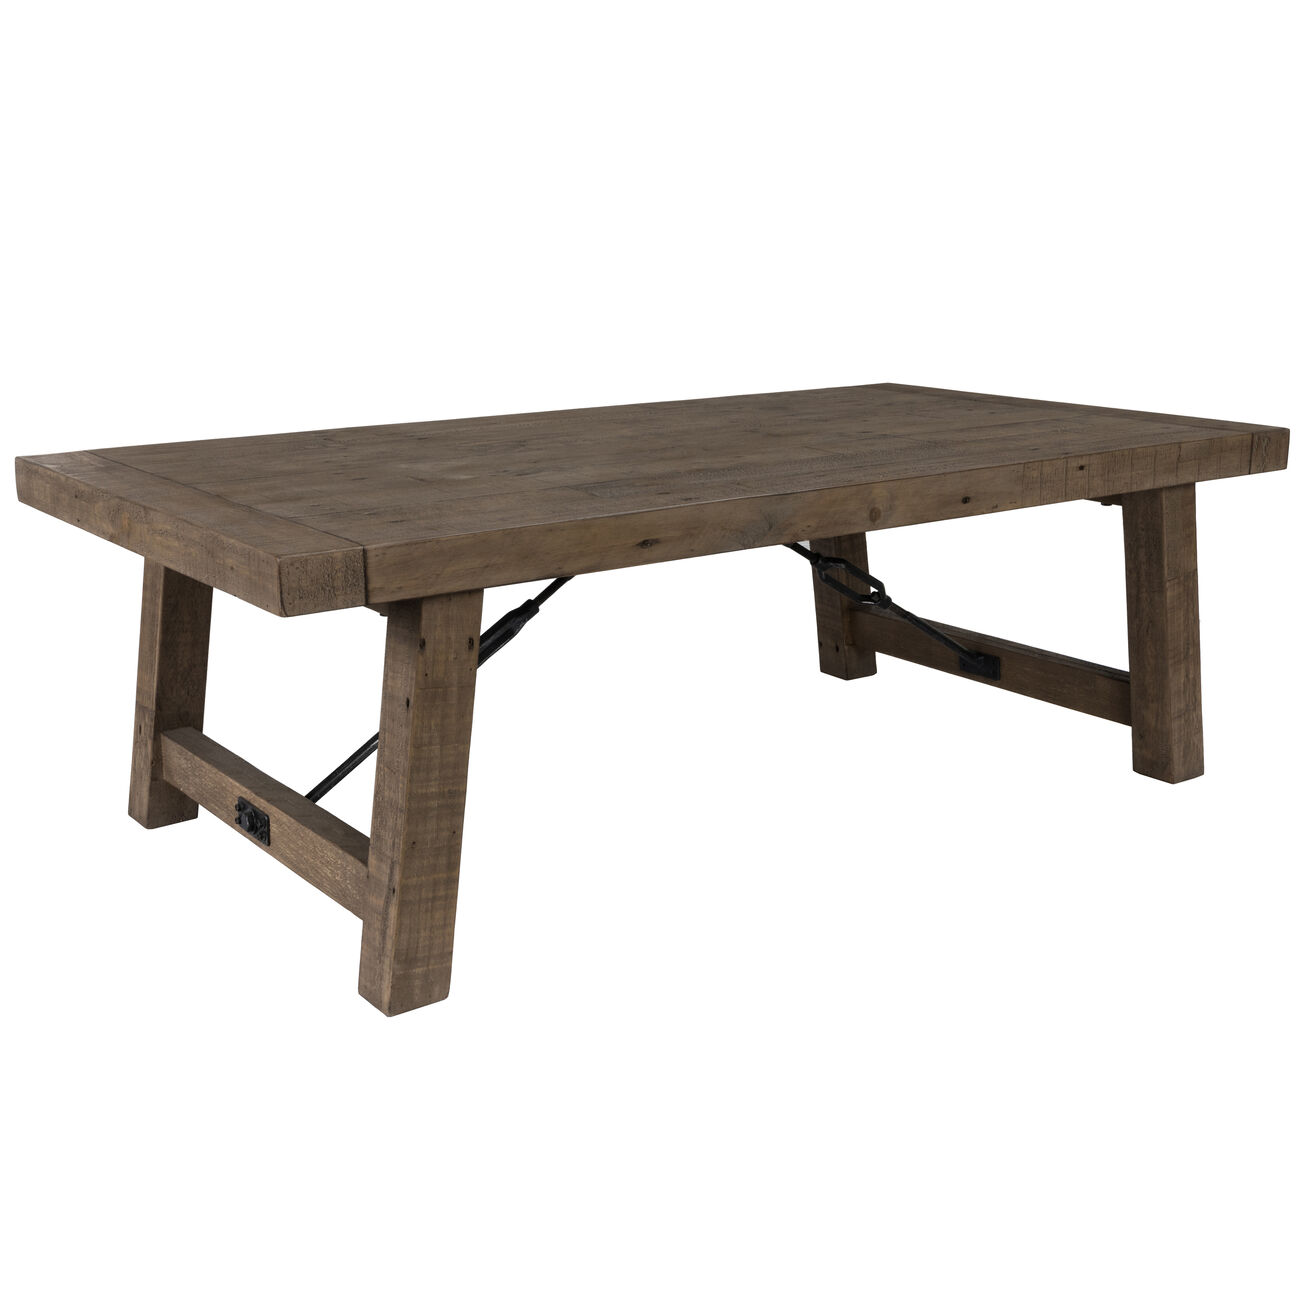 Handcrafted Reclaimed Wood Coffee Table with Grains, Weathered Gray